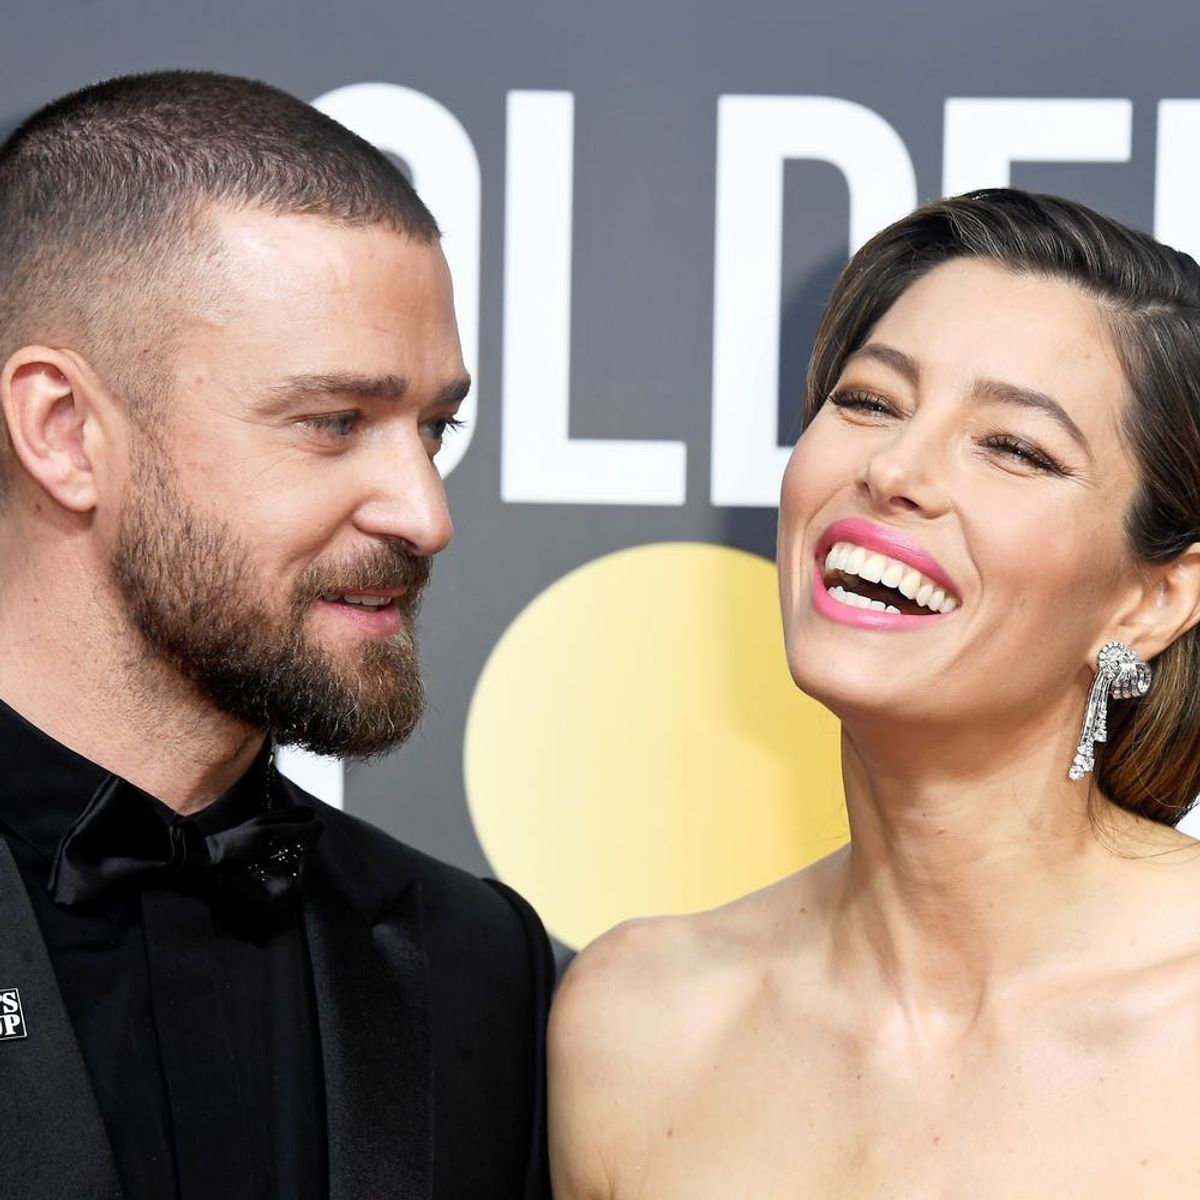 Justin Timberlake’s ‘Man of the Woods’ Video Is a Love Letter to Jessica Biel